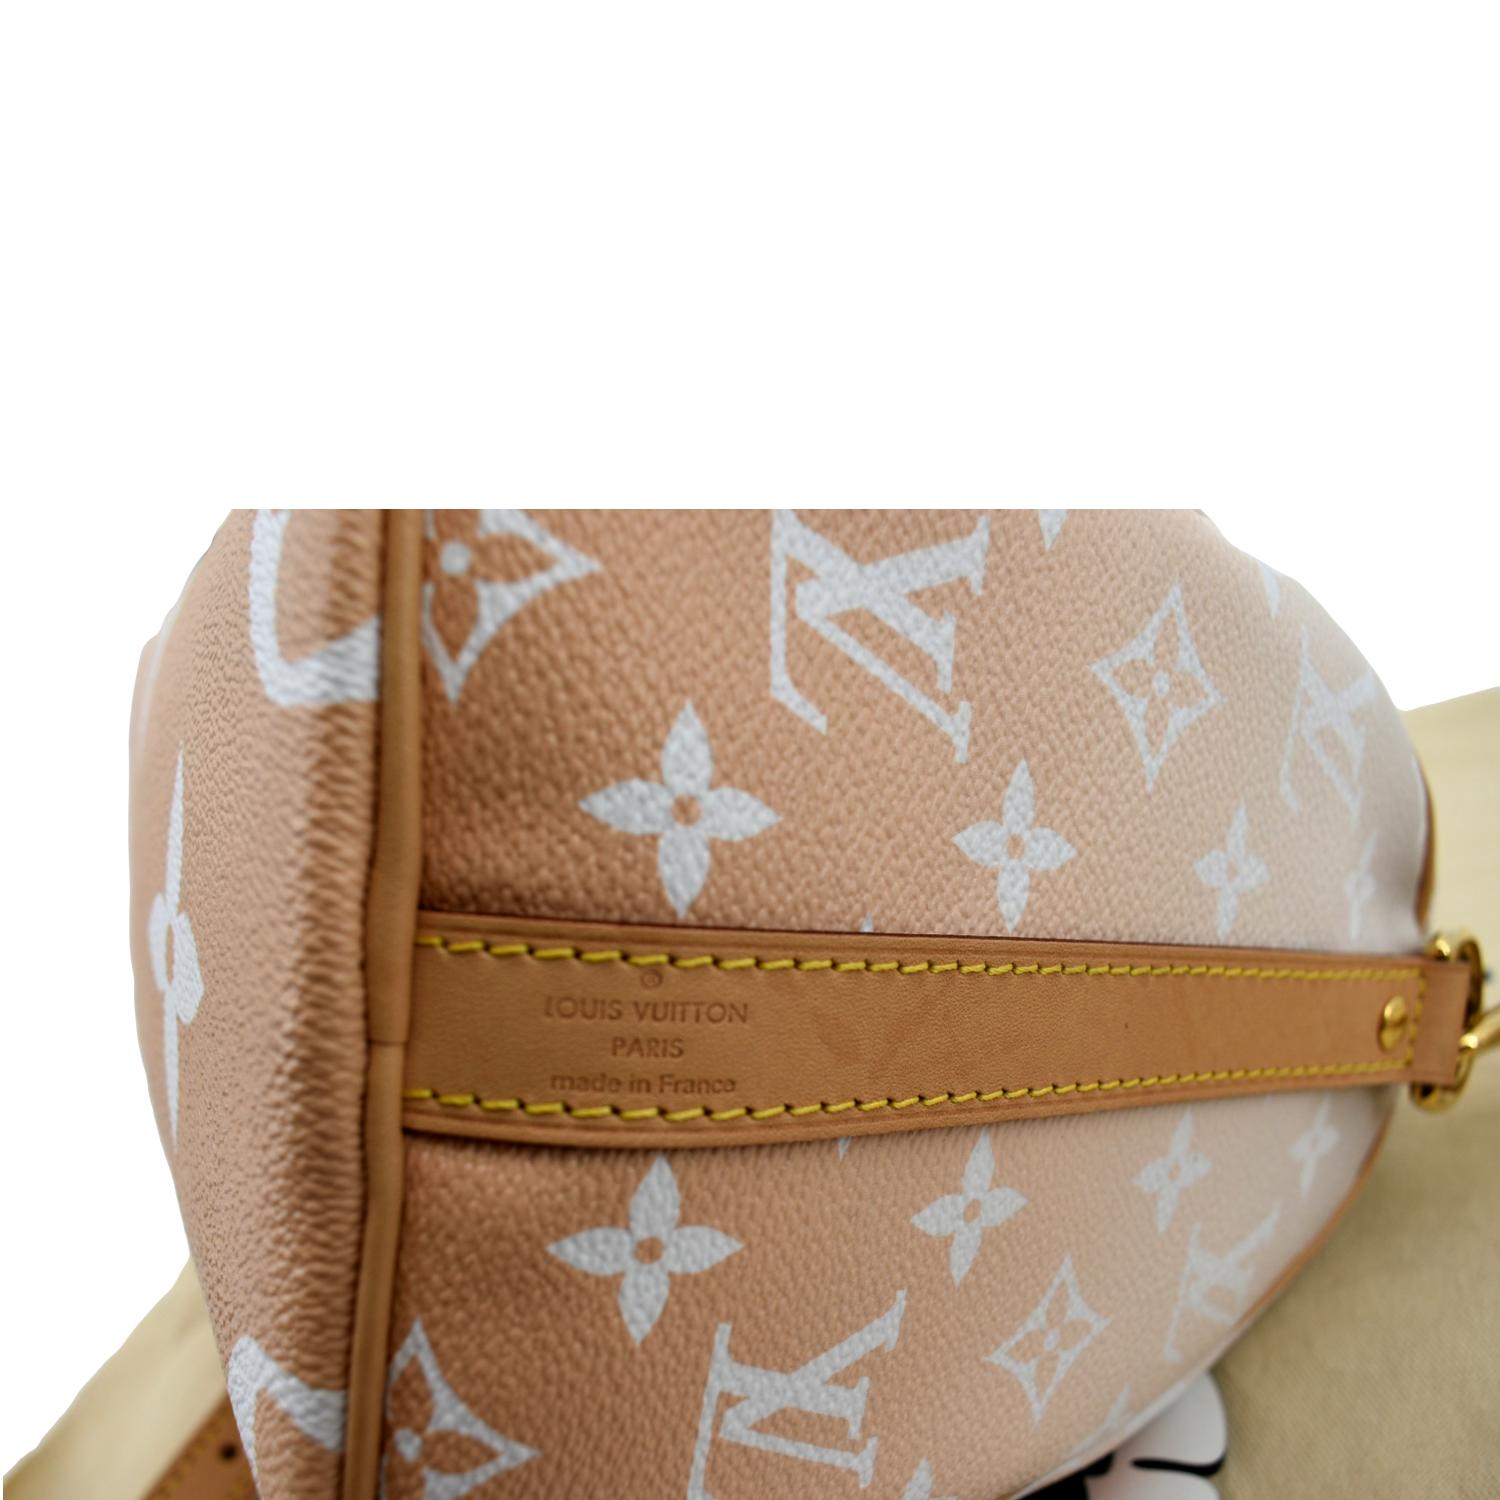 LOUIS VUITTON Speedy 25 Bag By The Pool M22987 Crossbody Hand Purse Auth LV  New